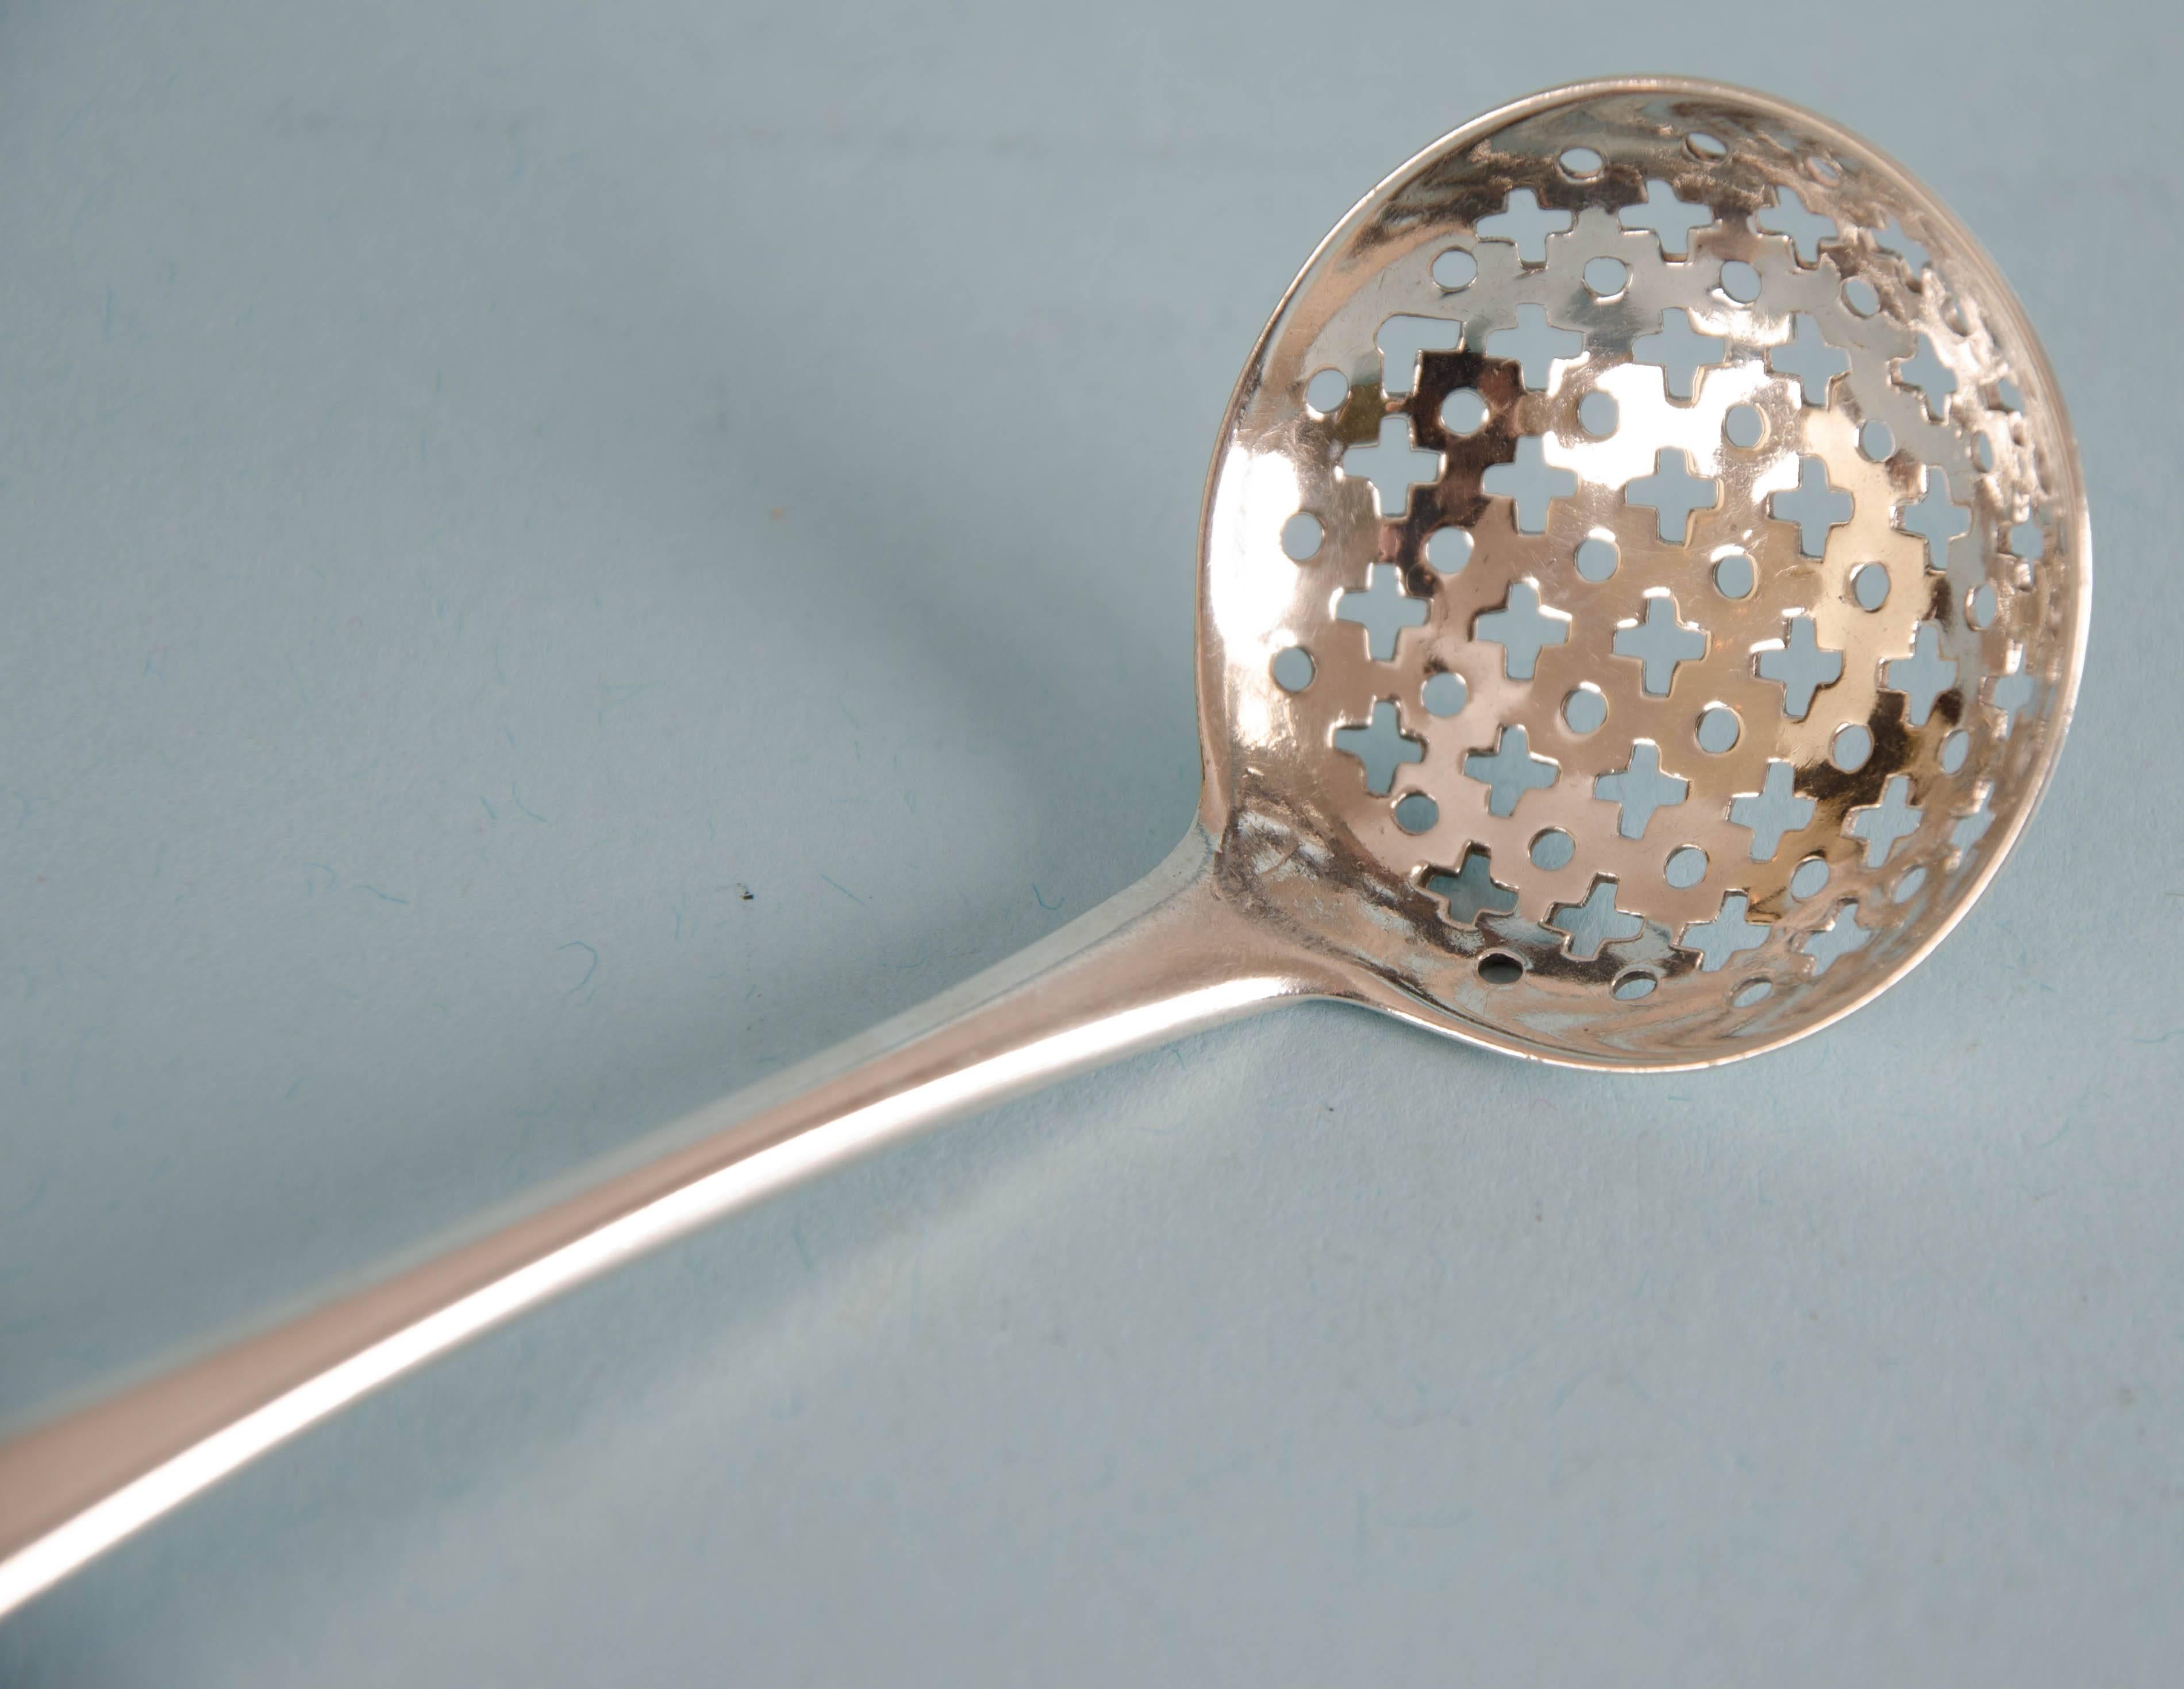 Extremely useful and attractive George III sterling silver Old English pattern sifter spoon. Made by Robert Rutland in London, 1810.
The top of the front of the handle is engraved with a contemporary family crest and a Scottish motto or battle cry